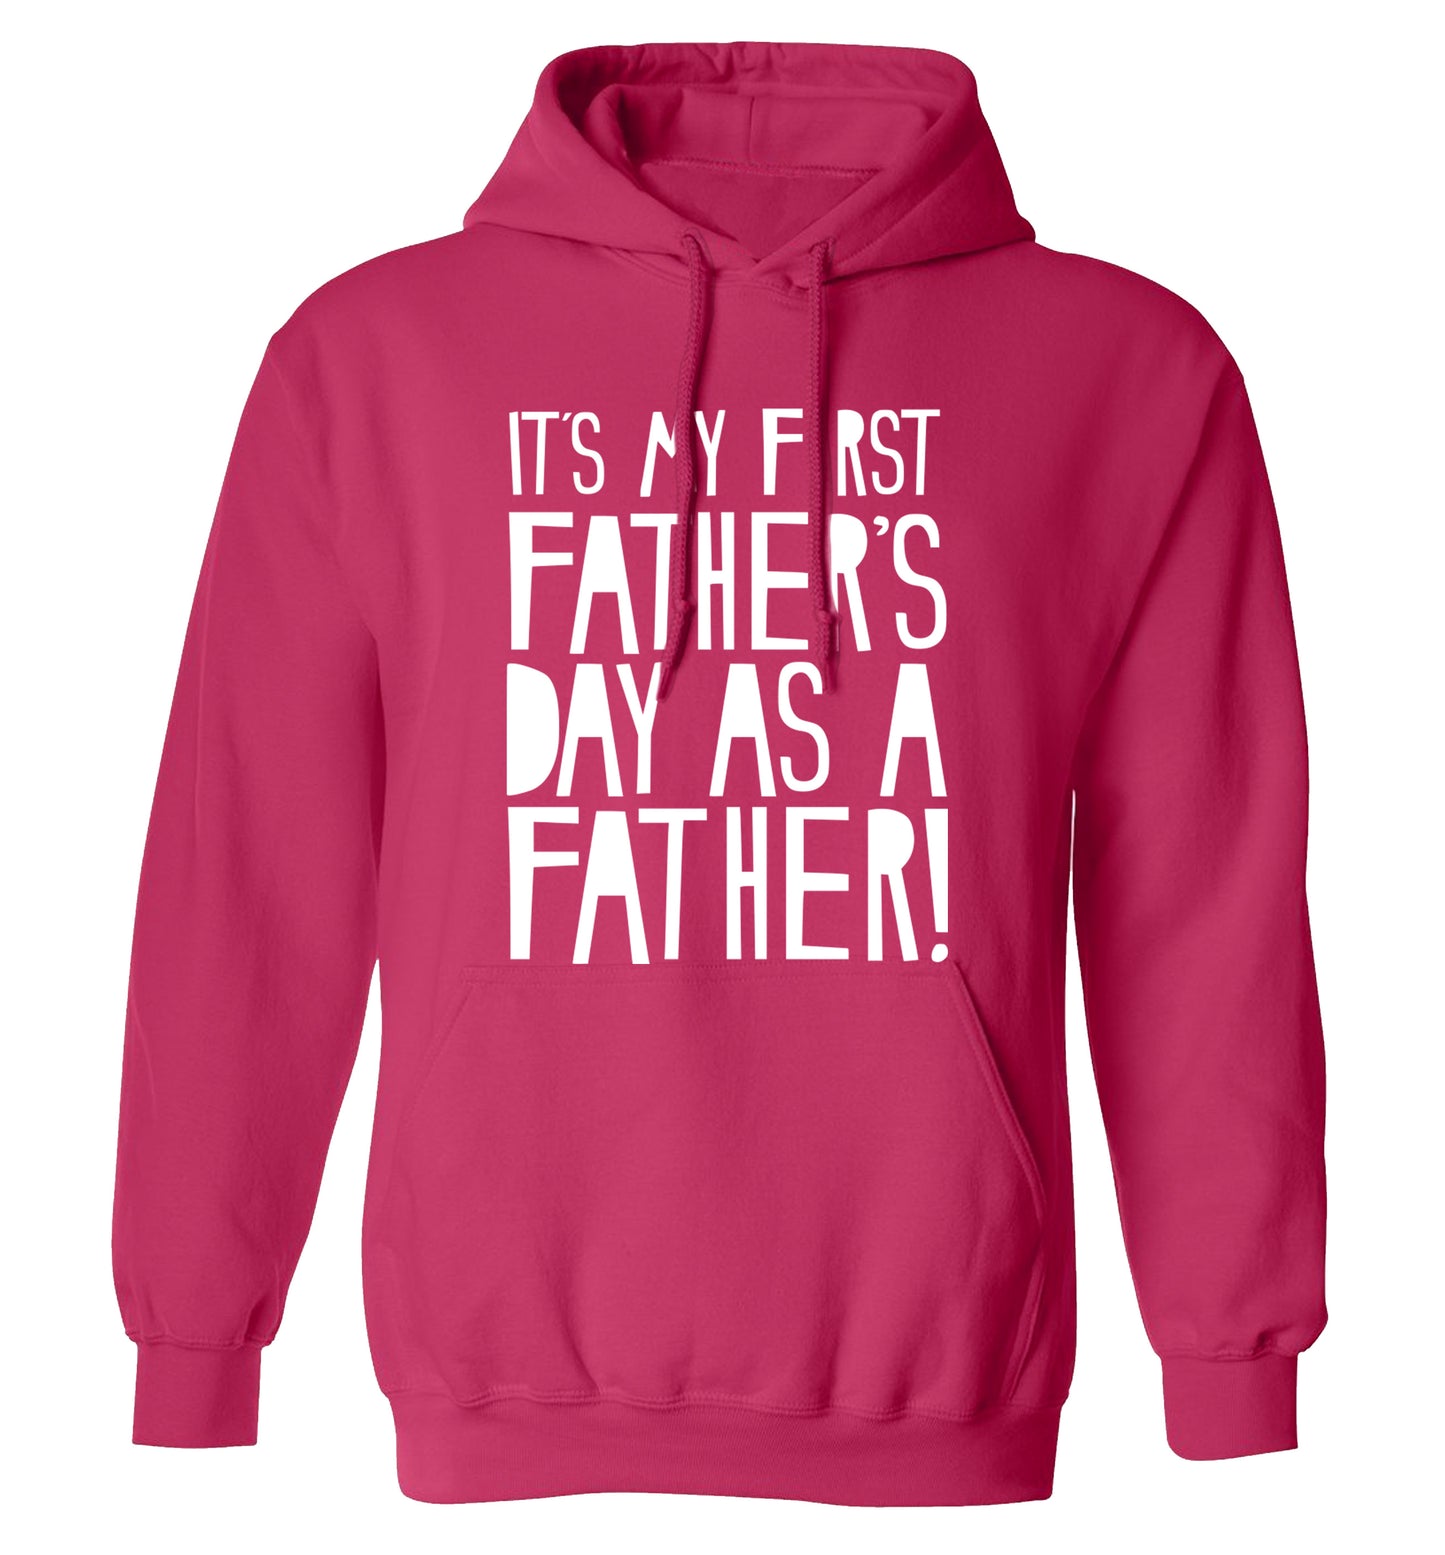 It's my first Father's Day as a father! adults unisex pink hoodie 2XL